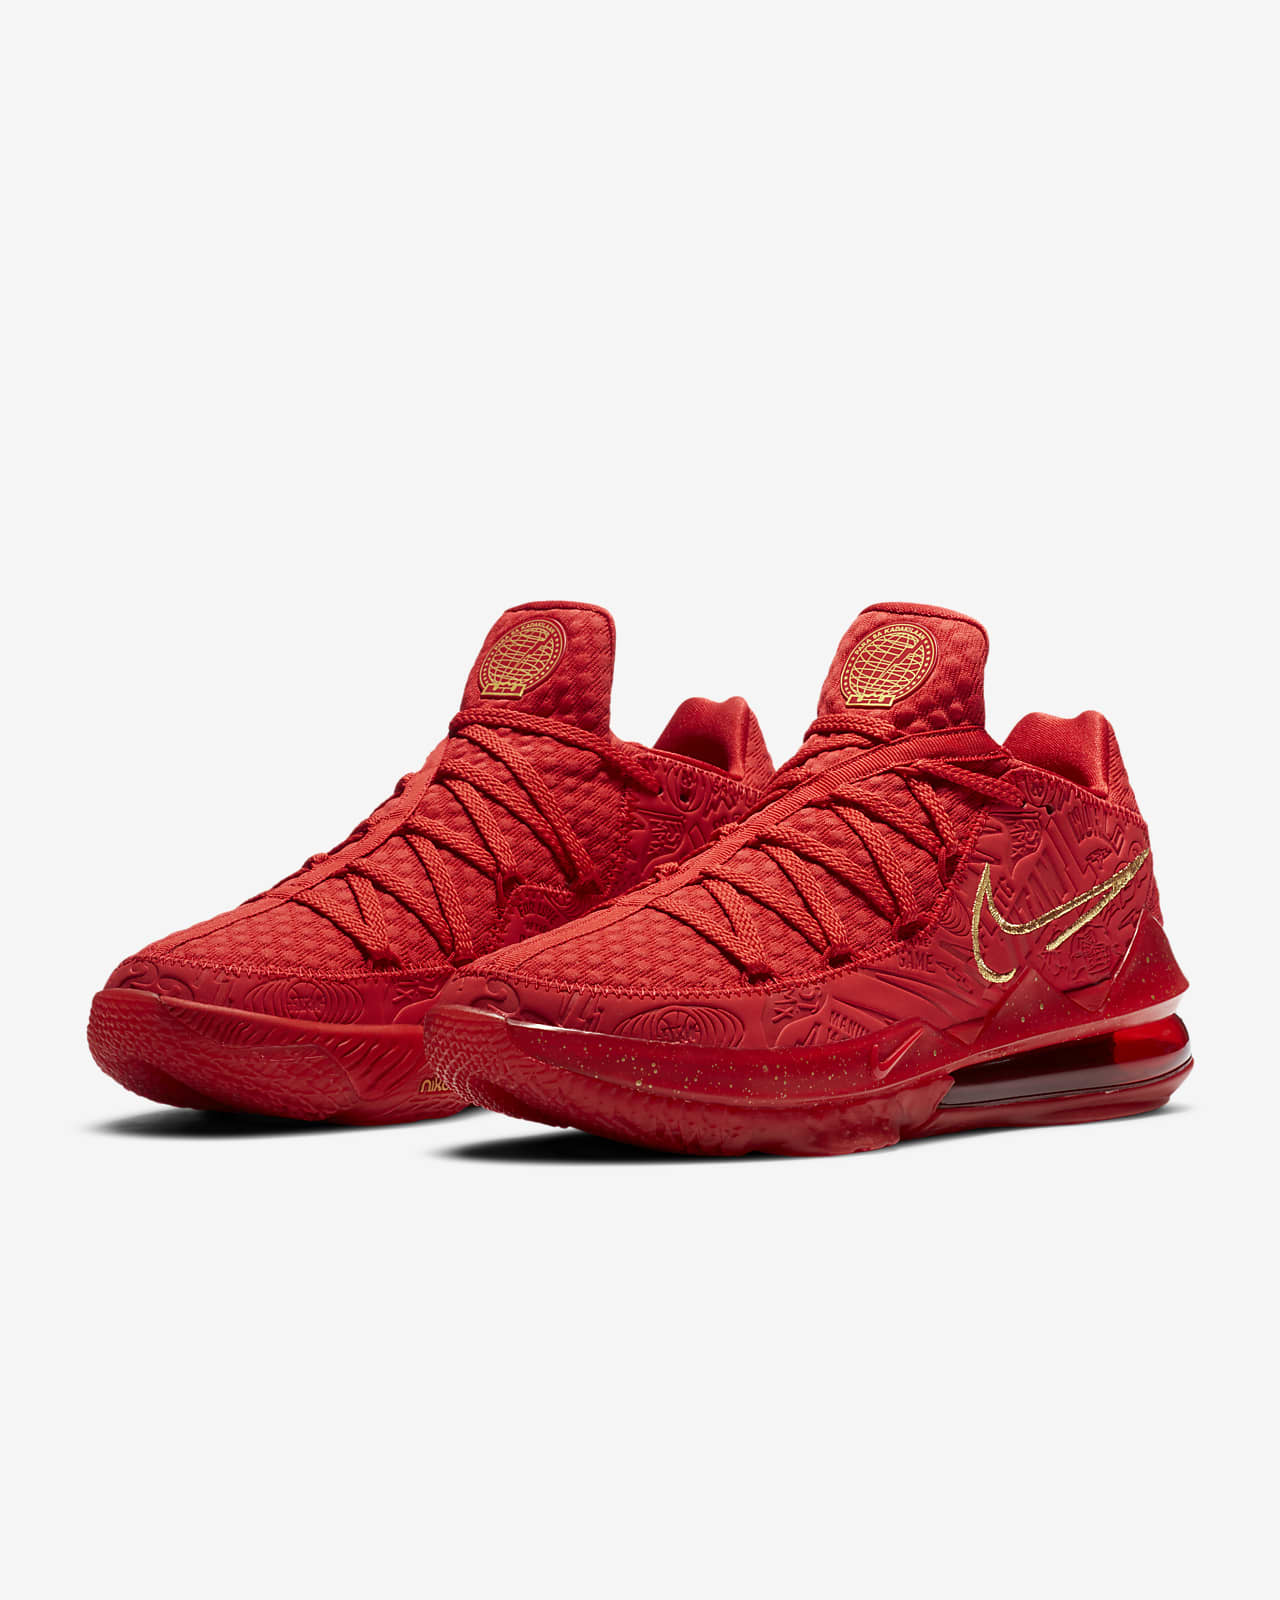 lebron 17 low red